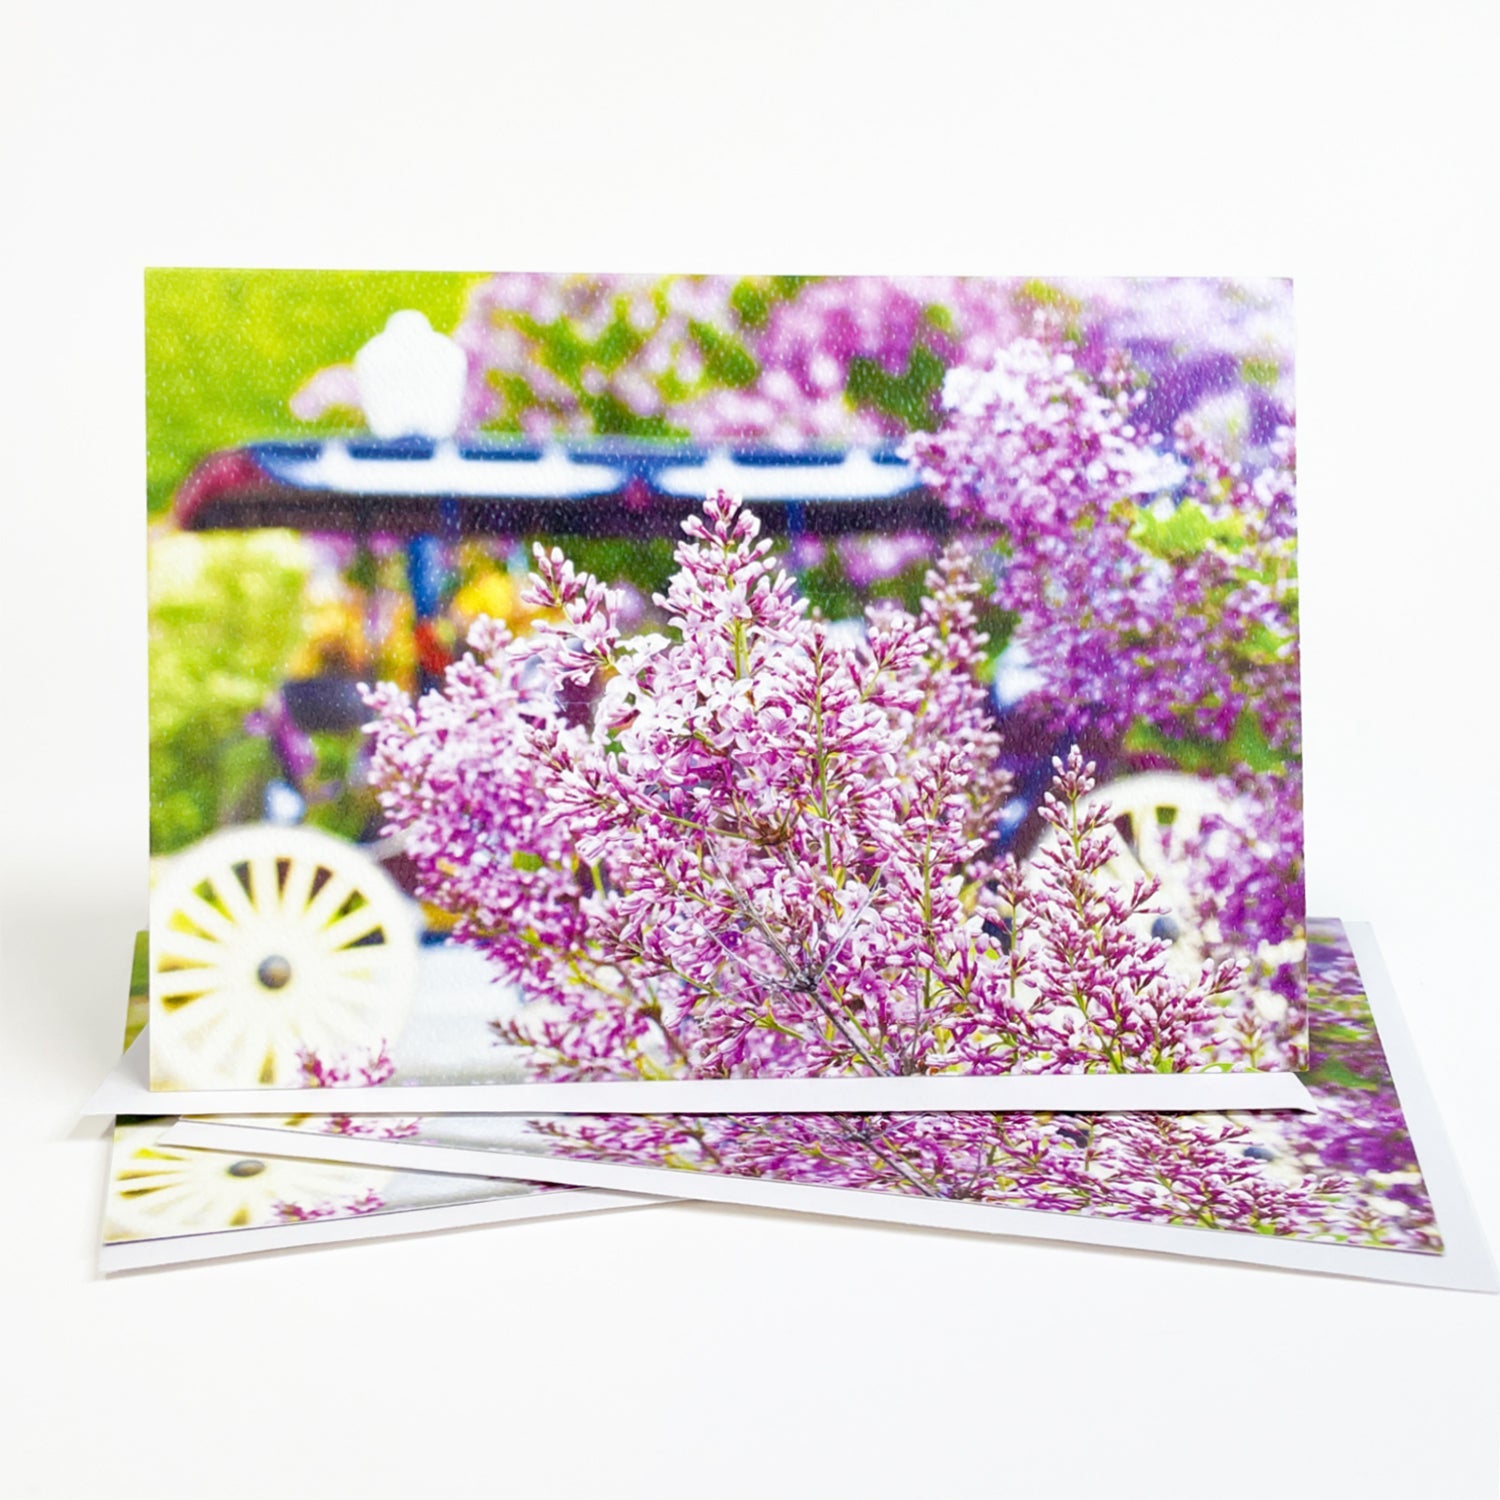 Blank greeting card featuring a photograph of Mackinac Island lilacs and a horse carriage at Marquette Park by local artist Jennifer Wohletz of Mackinac Memories. 